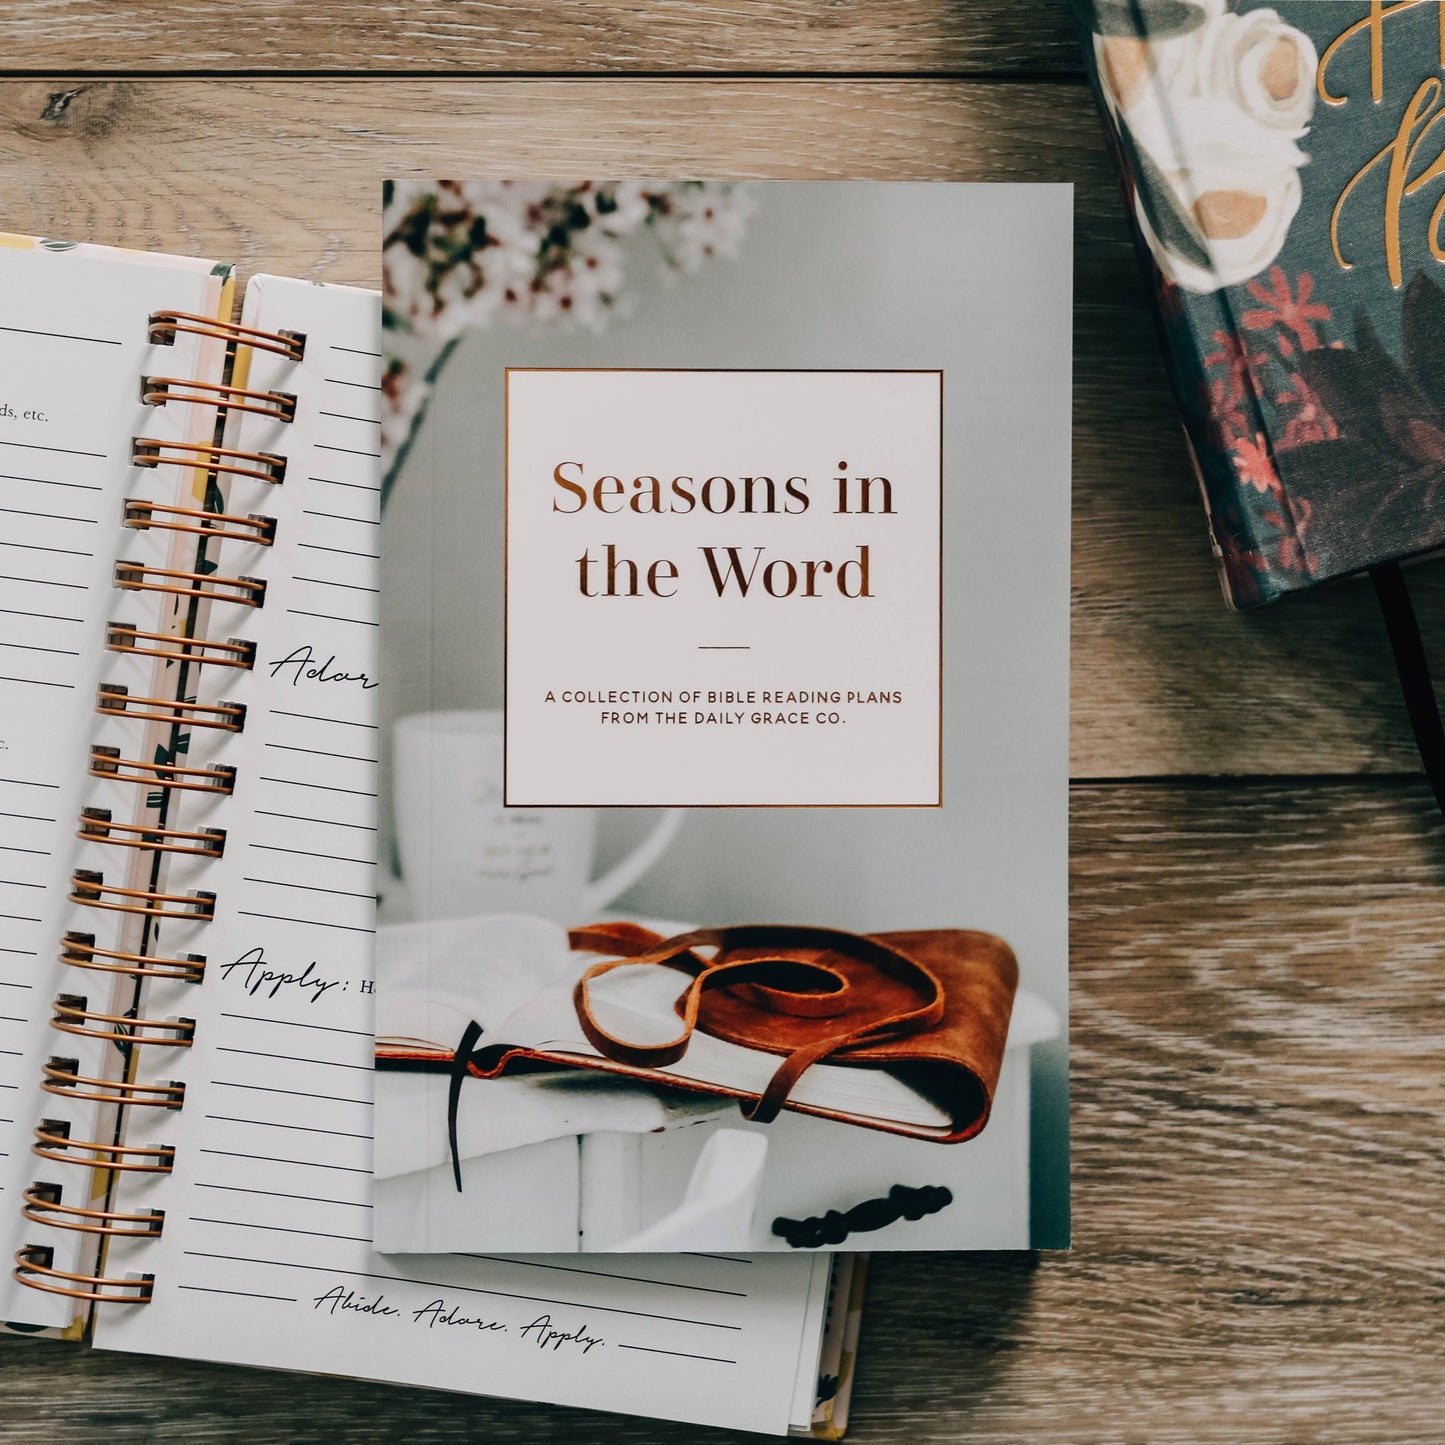 Seasons in the Word - A Collection of Bible Reading Plans from the Daily Grace Co.